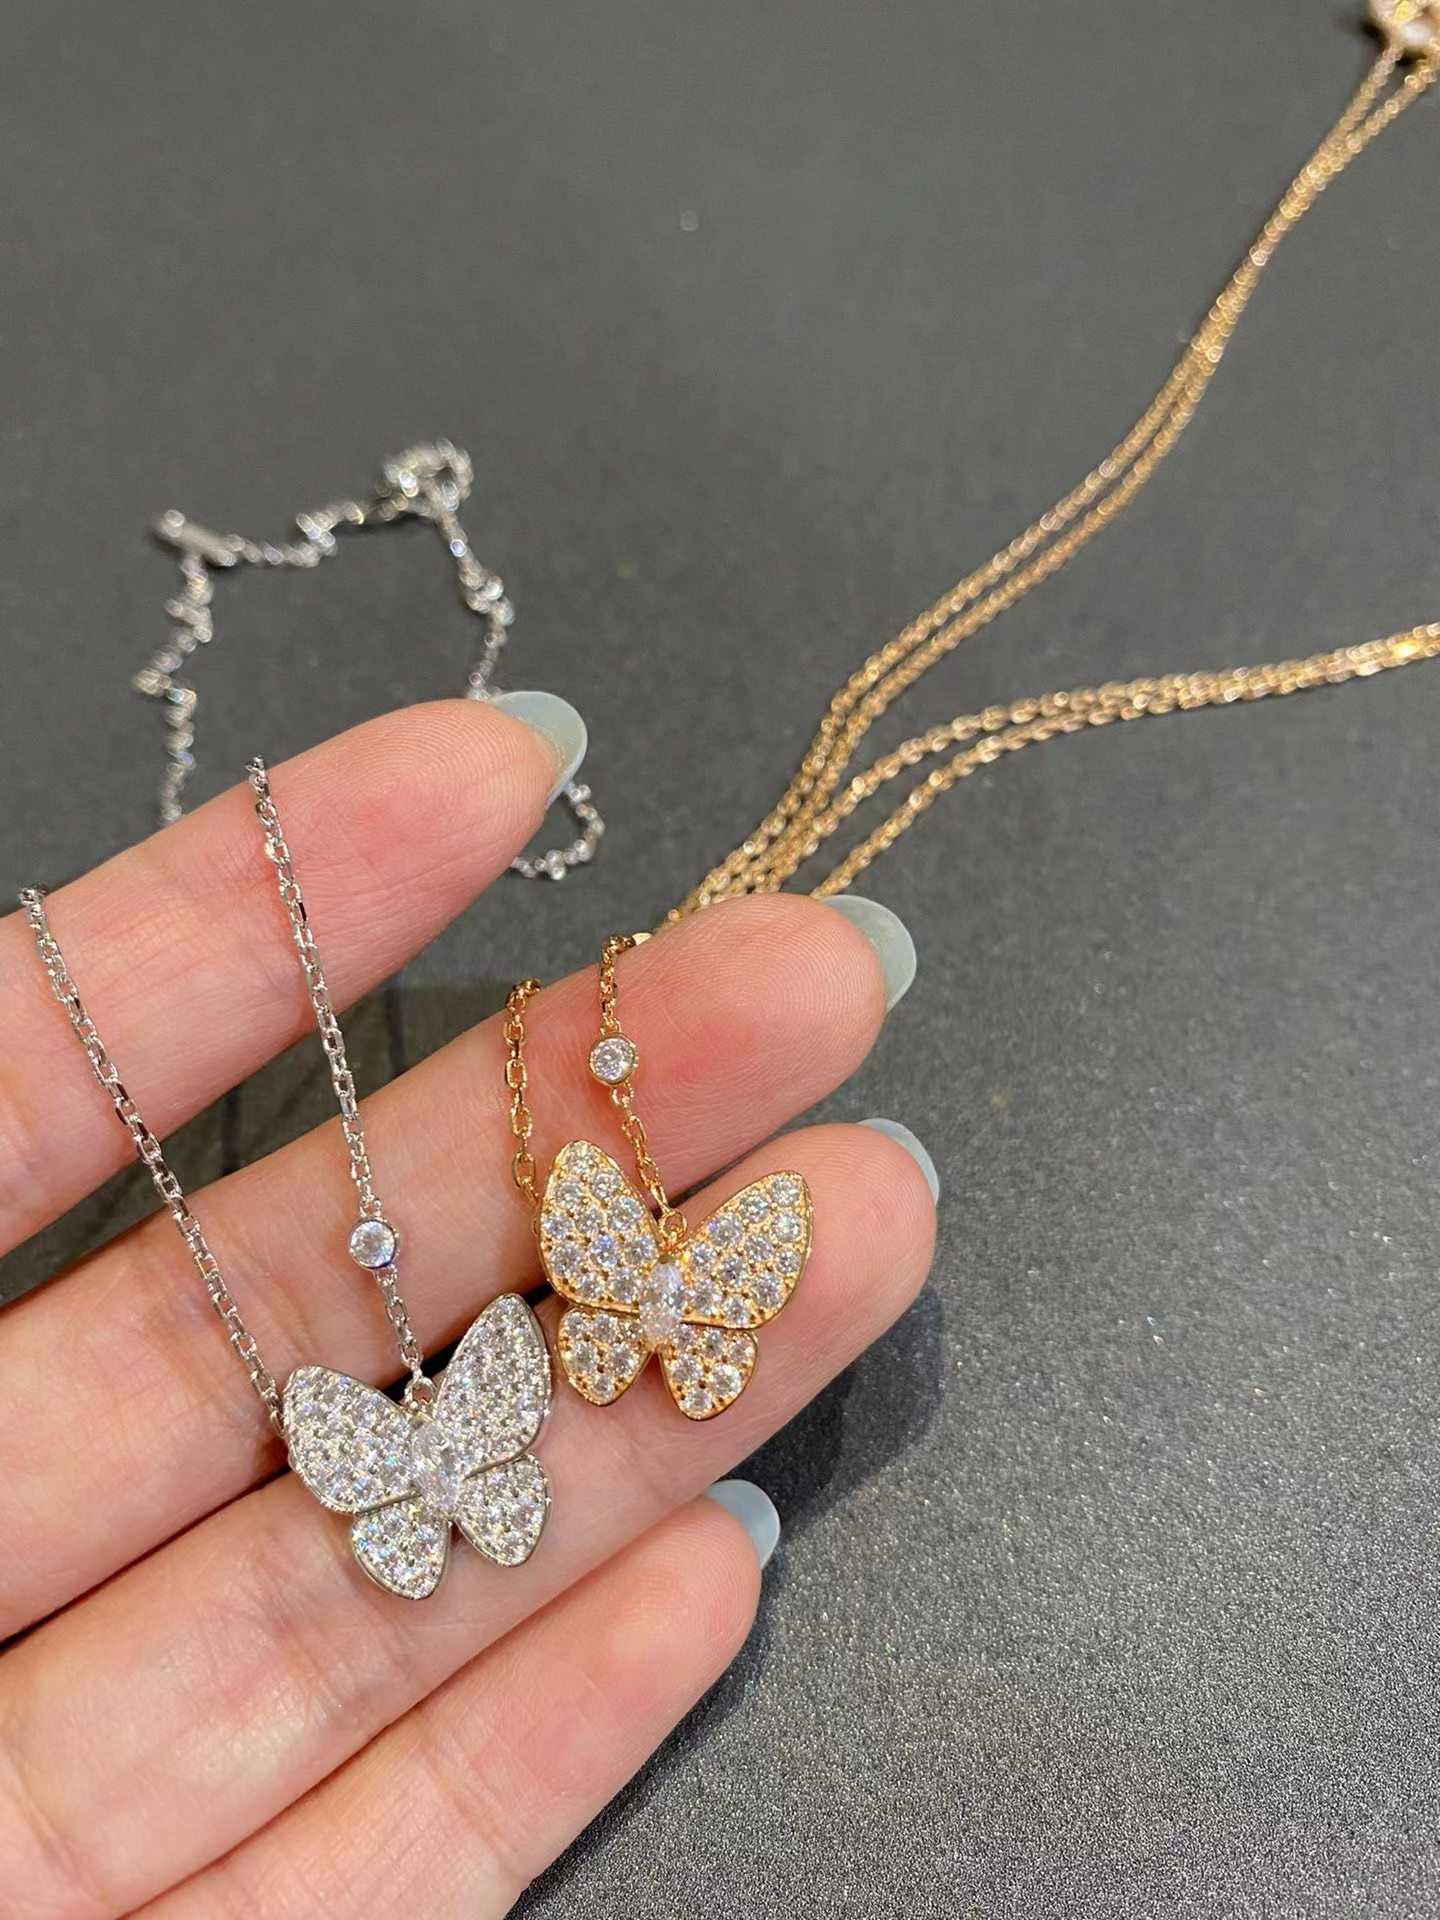 Designer Brand New Van Precision Edition Full Diamond Horse Eye Butterfly Necklace with 18k Rose Gold Plated Lock Bone Chain Straight for Women With logo